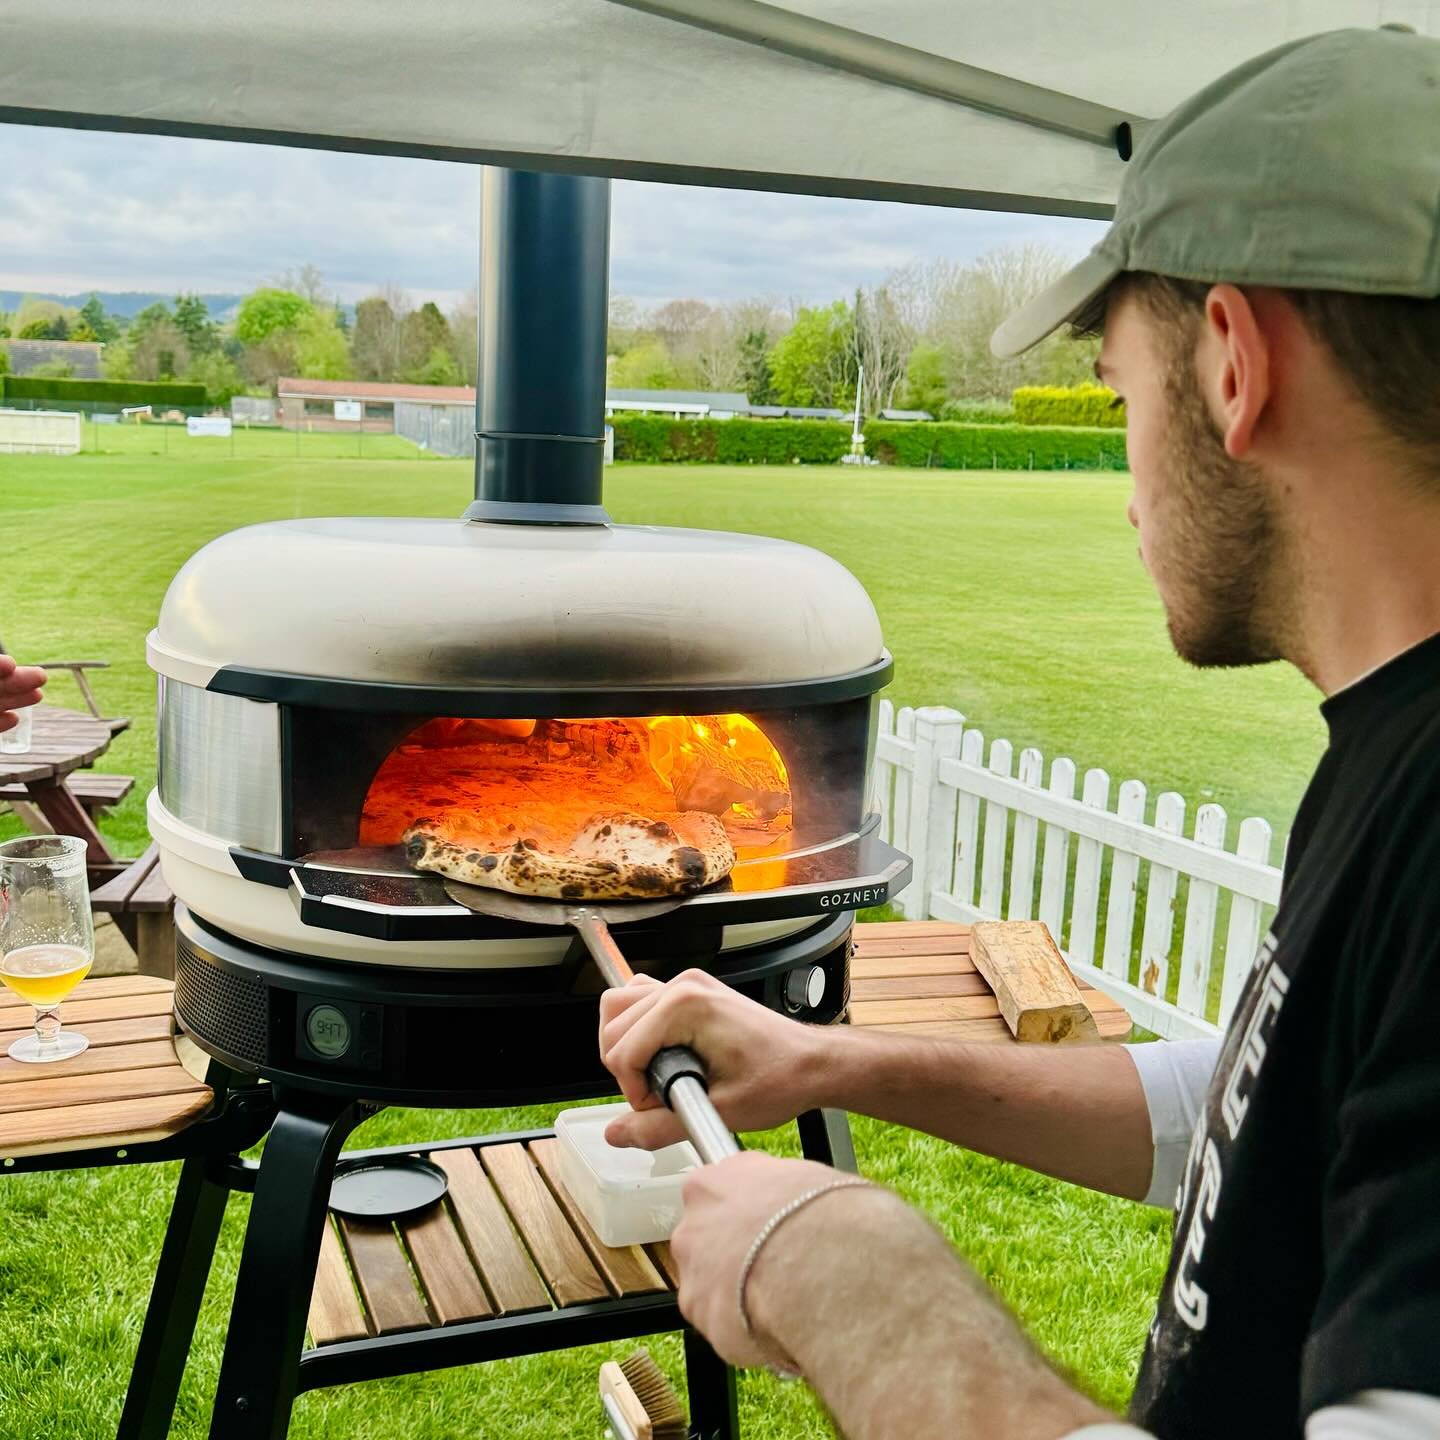 Get ready for an epic summer with MF EVENTS! 🍕☀️ 

Kicking off this Friday (the 19th), we&rsquo;re setting up shop at the Reigate Cricket Club to dish out our delicious pizzas all season long 🙌 

Join us every Friday until late July for some epic p